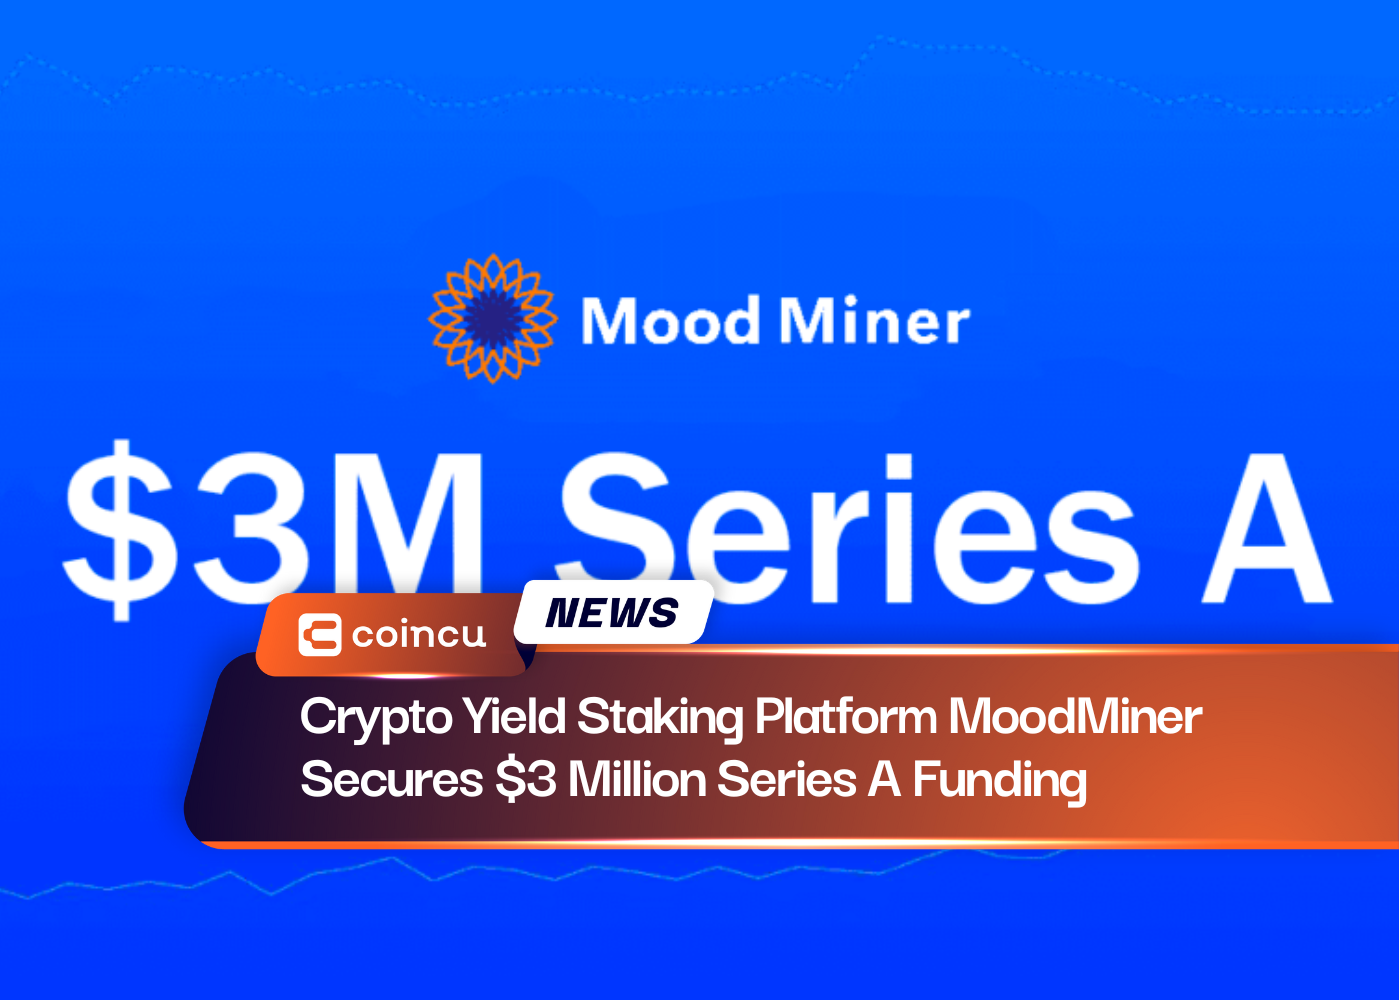 Crypto Yield Staking Platform MoodMiner Secures $3 Million Series A Funding